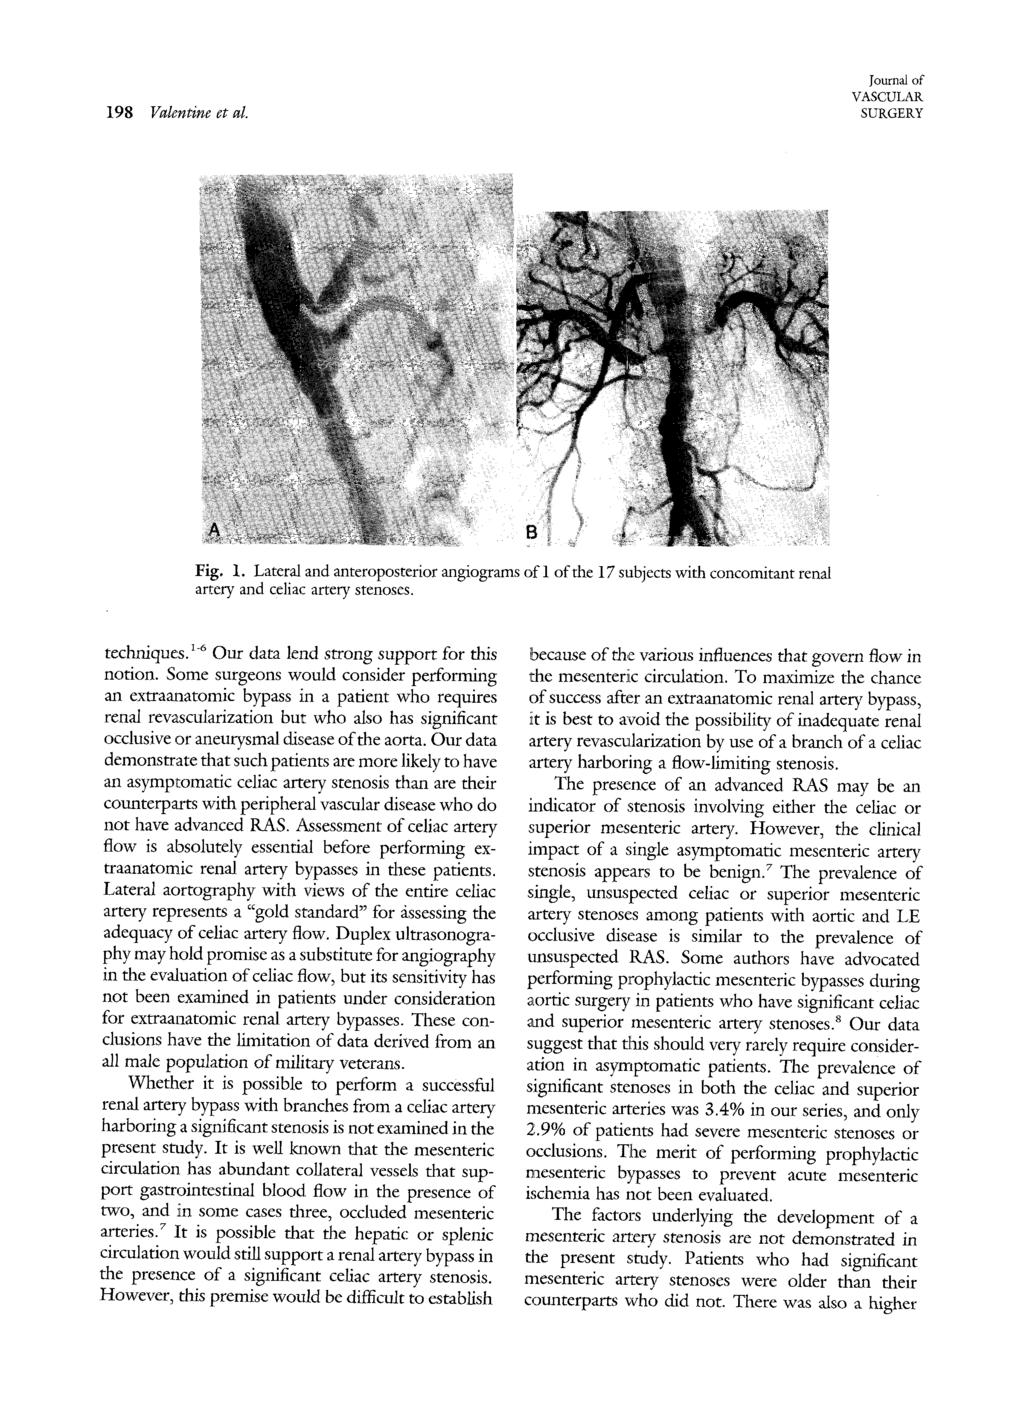 198 Valentine et al. Journal of VASCULAR SURGERY Fig. 1. Lateraland anteroposterior angiograms ofl ofthe 17 subjects with concomitant renal artery and celiac artery stenoses. techniques.